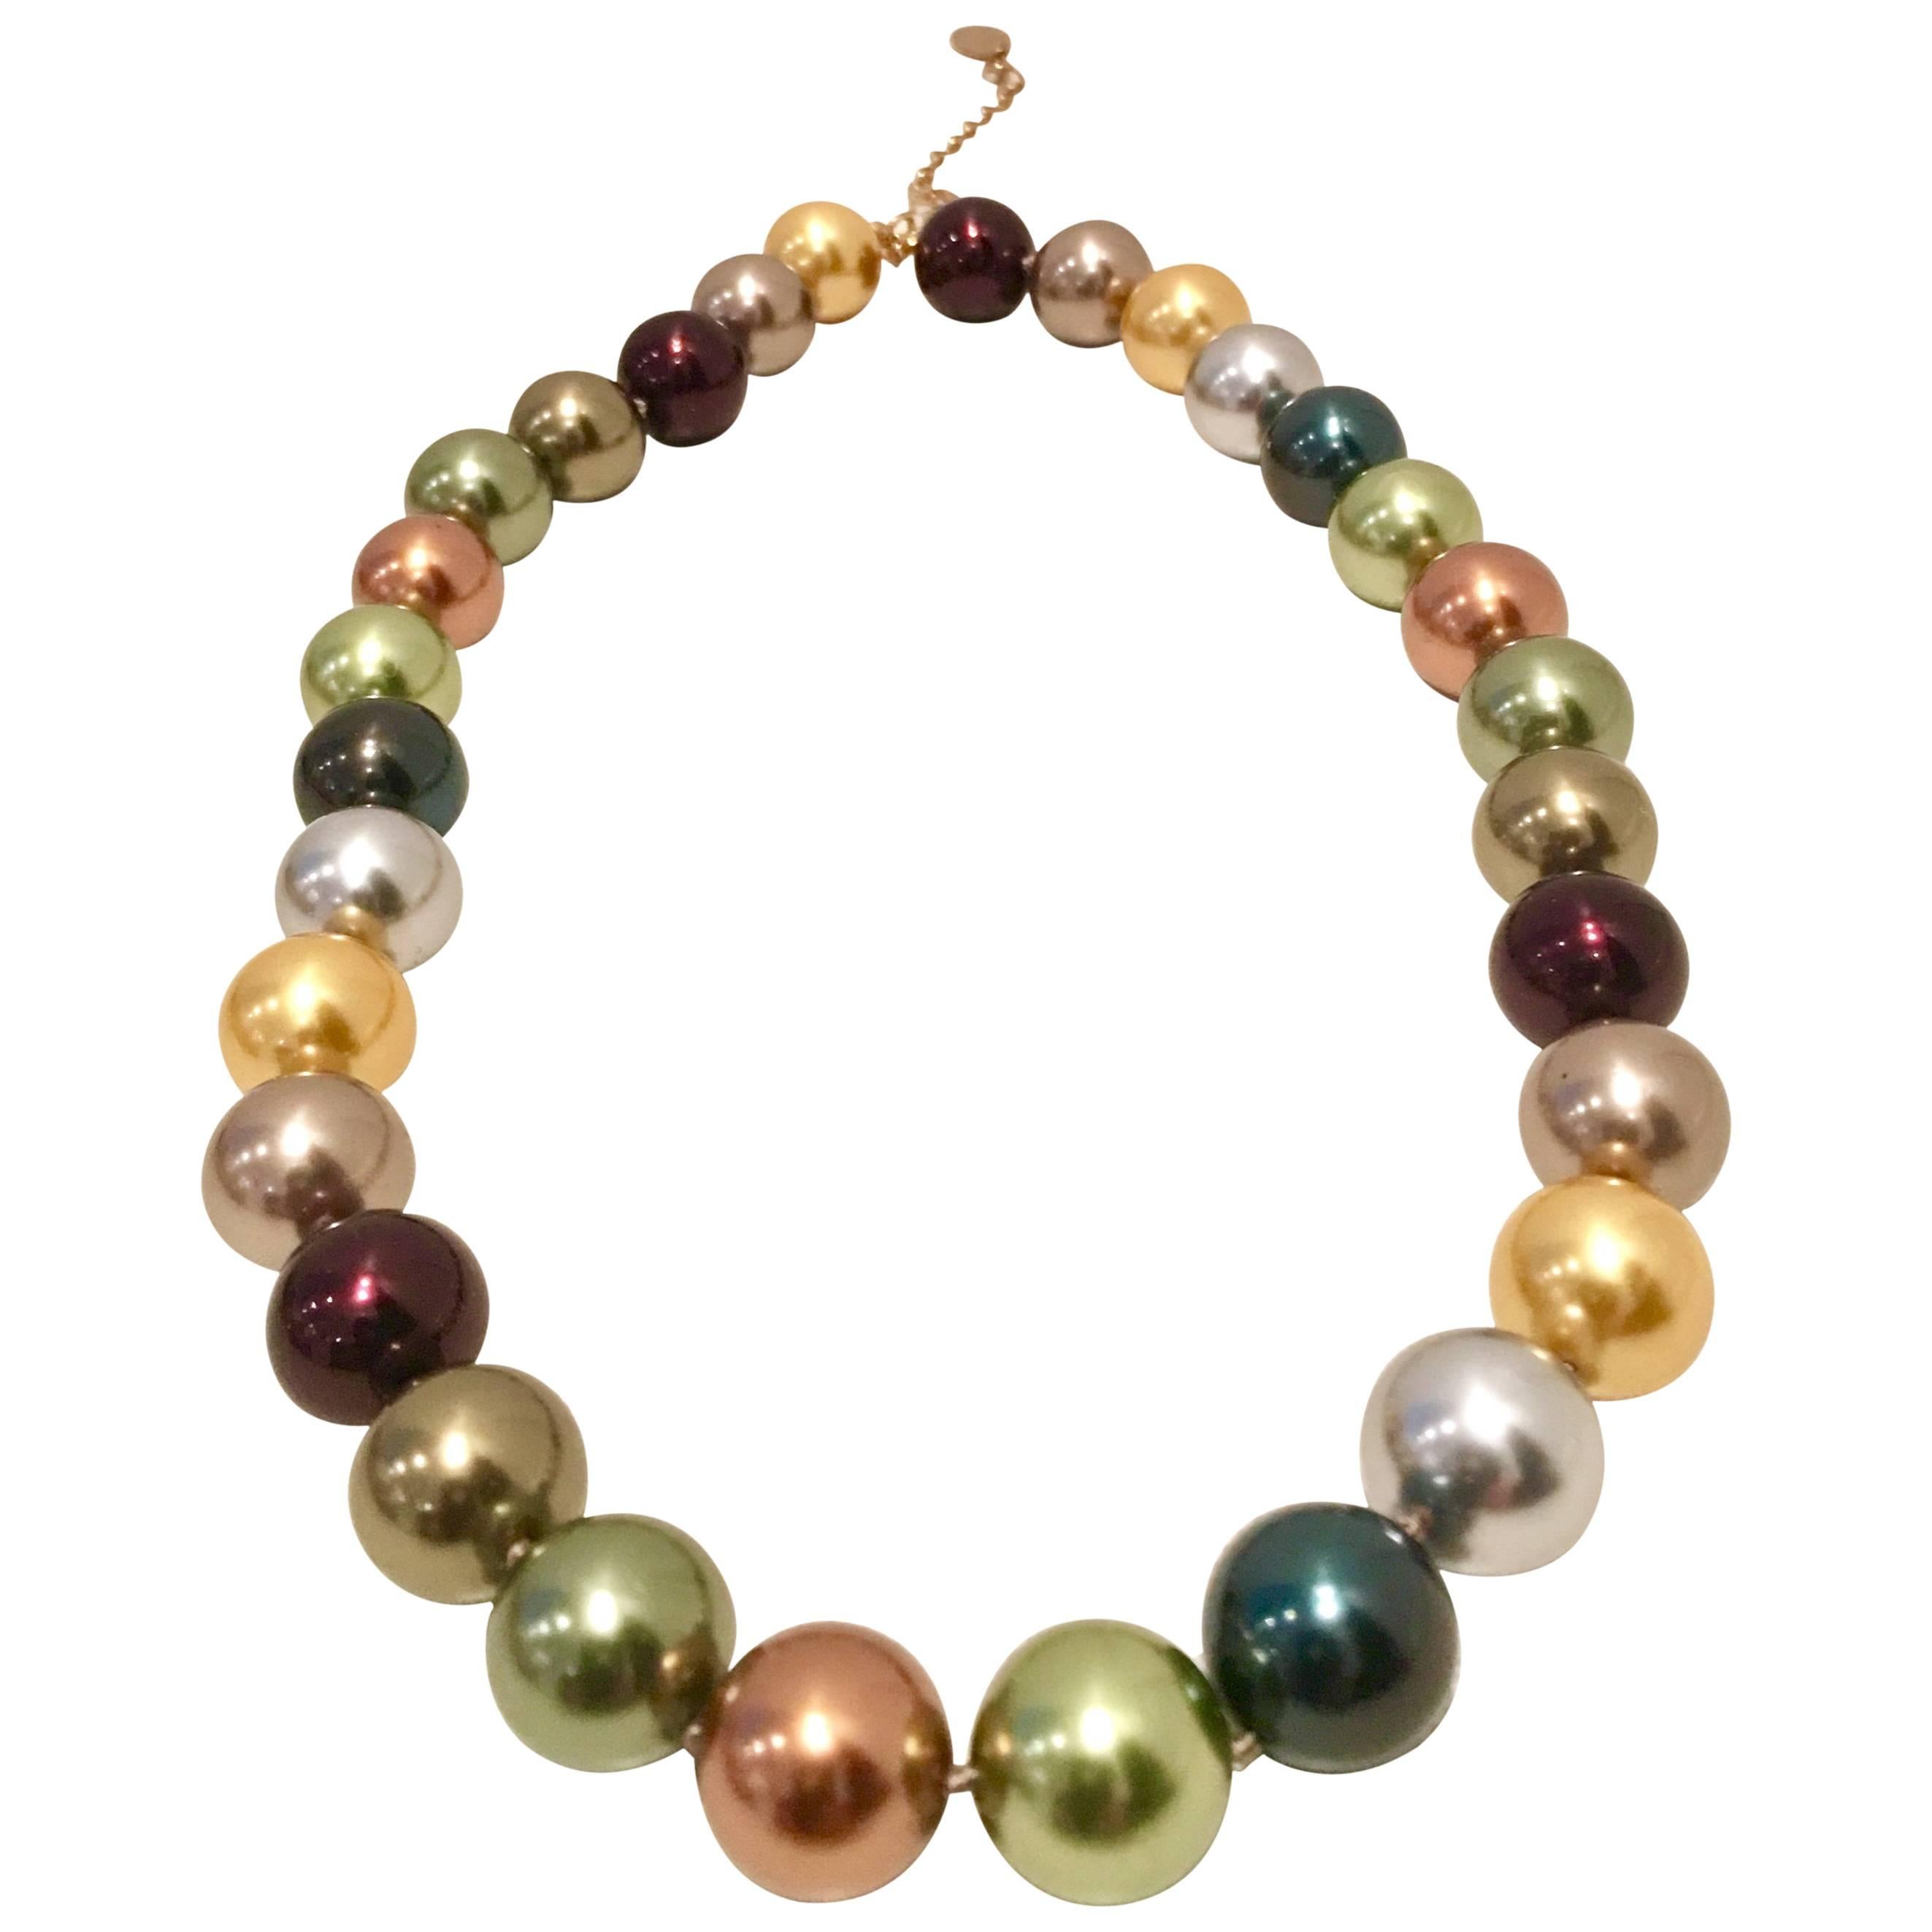 21st Century Faux Pearl Bead Choker Style Necklace By, Kenneth Lane For Sale